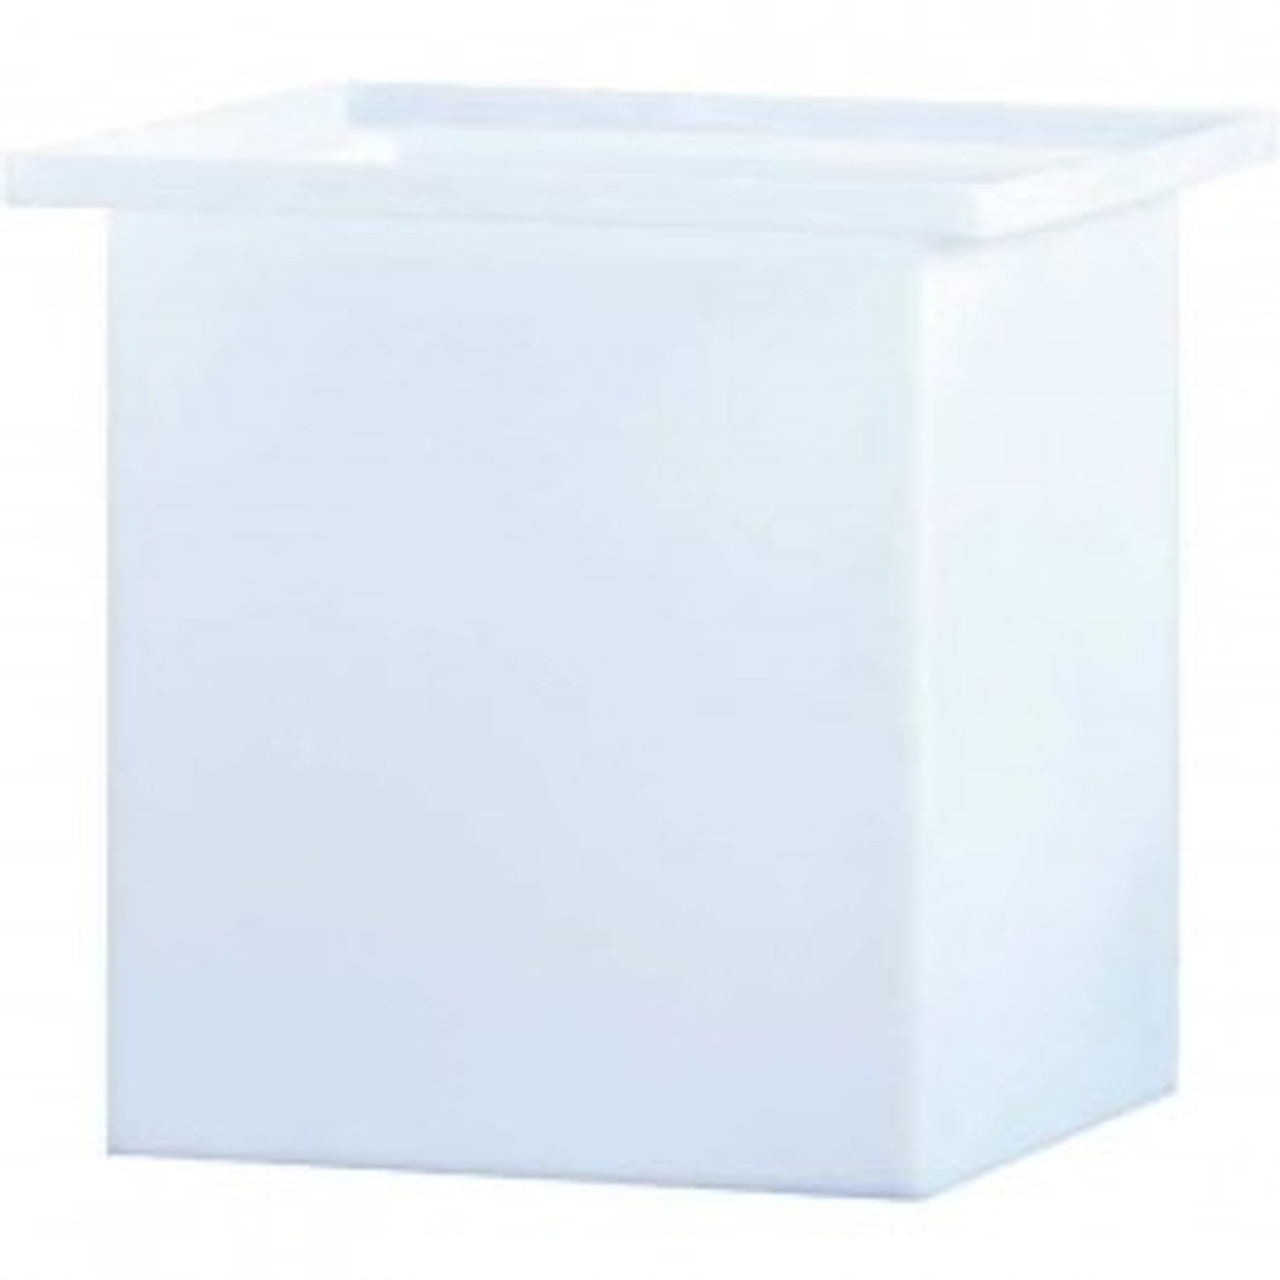 An image of a 22 Gallon PE Chem-Tainer White Rectangular Open Top Tank | R122418A